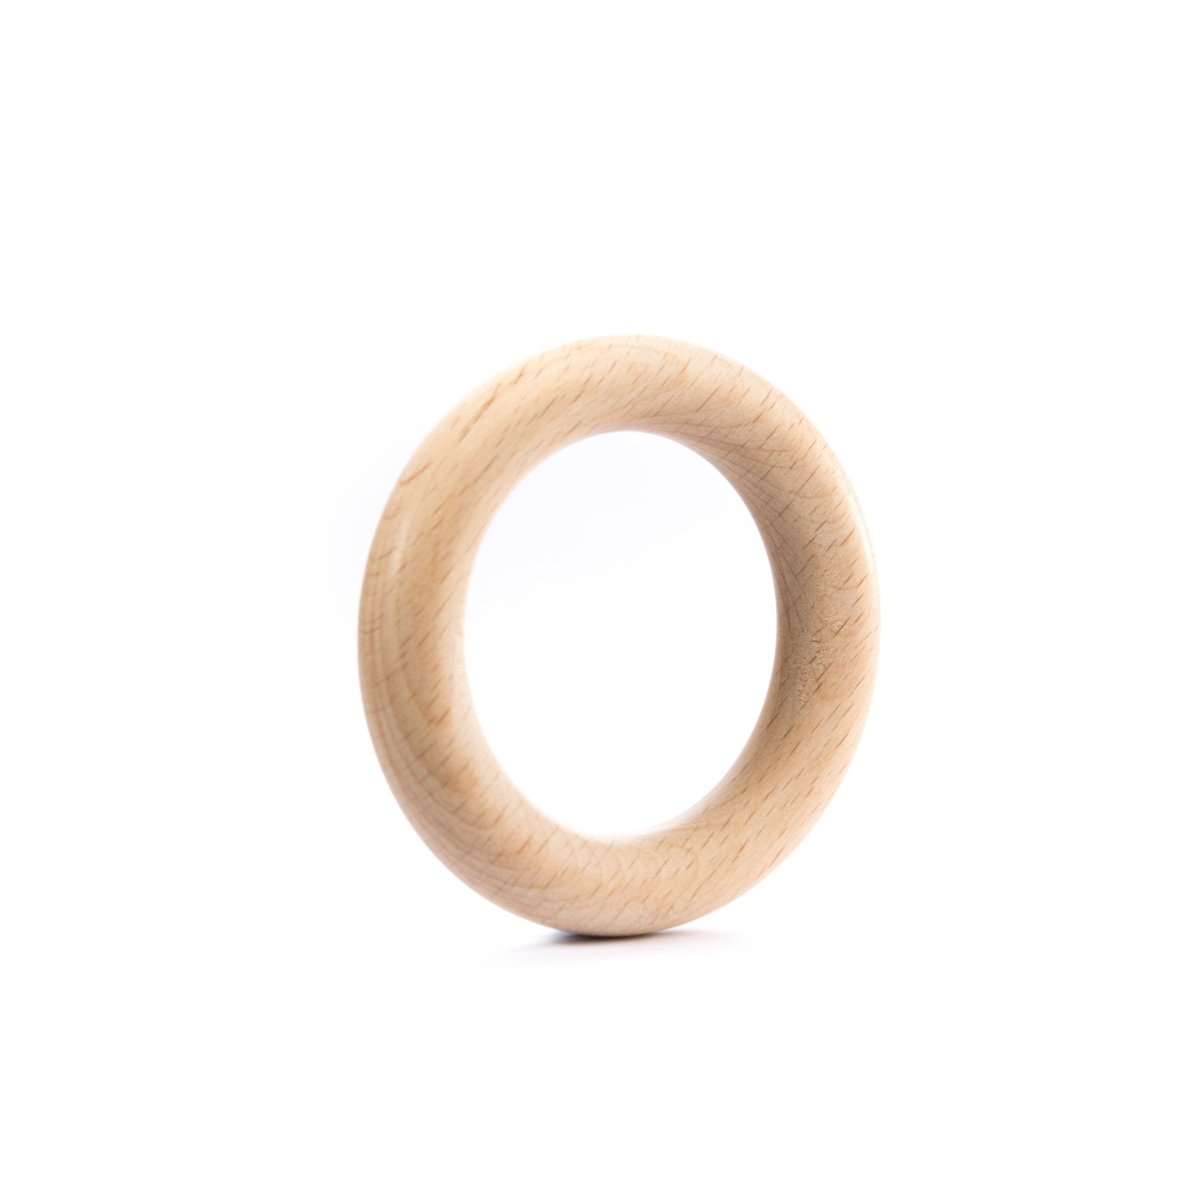 Wood Rings & Pendants Beech Wood 3.20" from Cara & Co Craft Supply